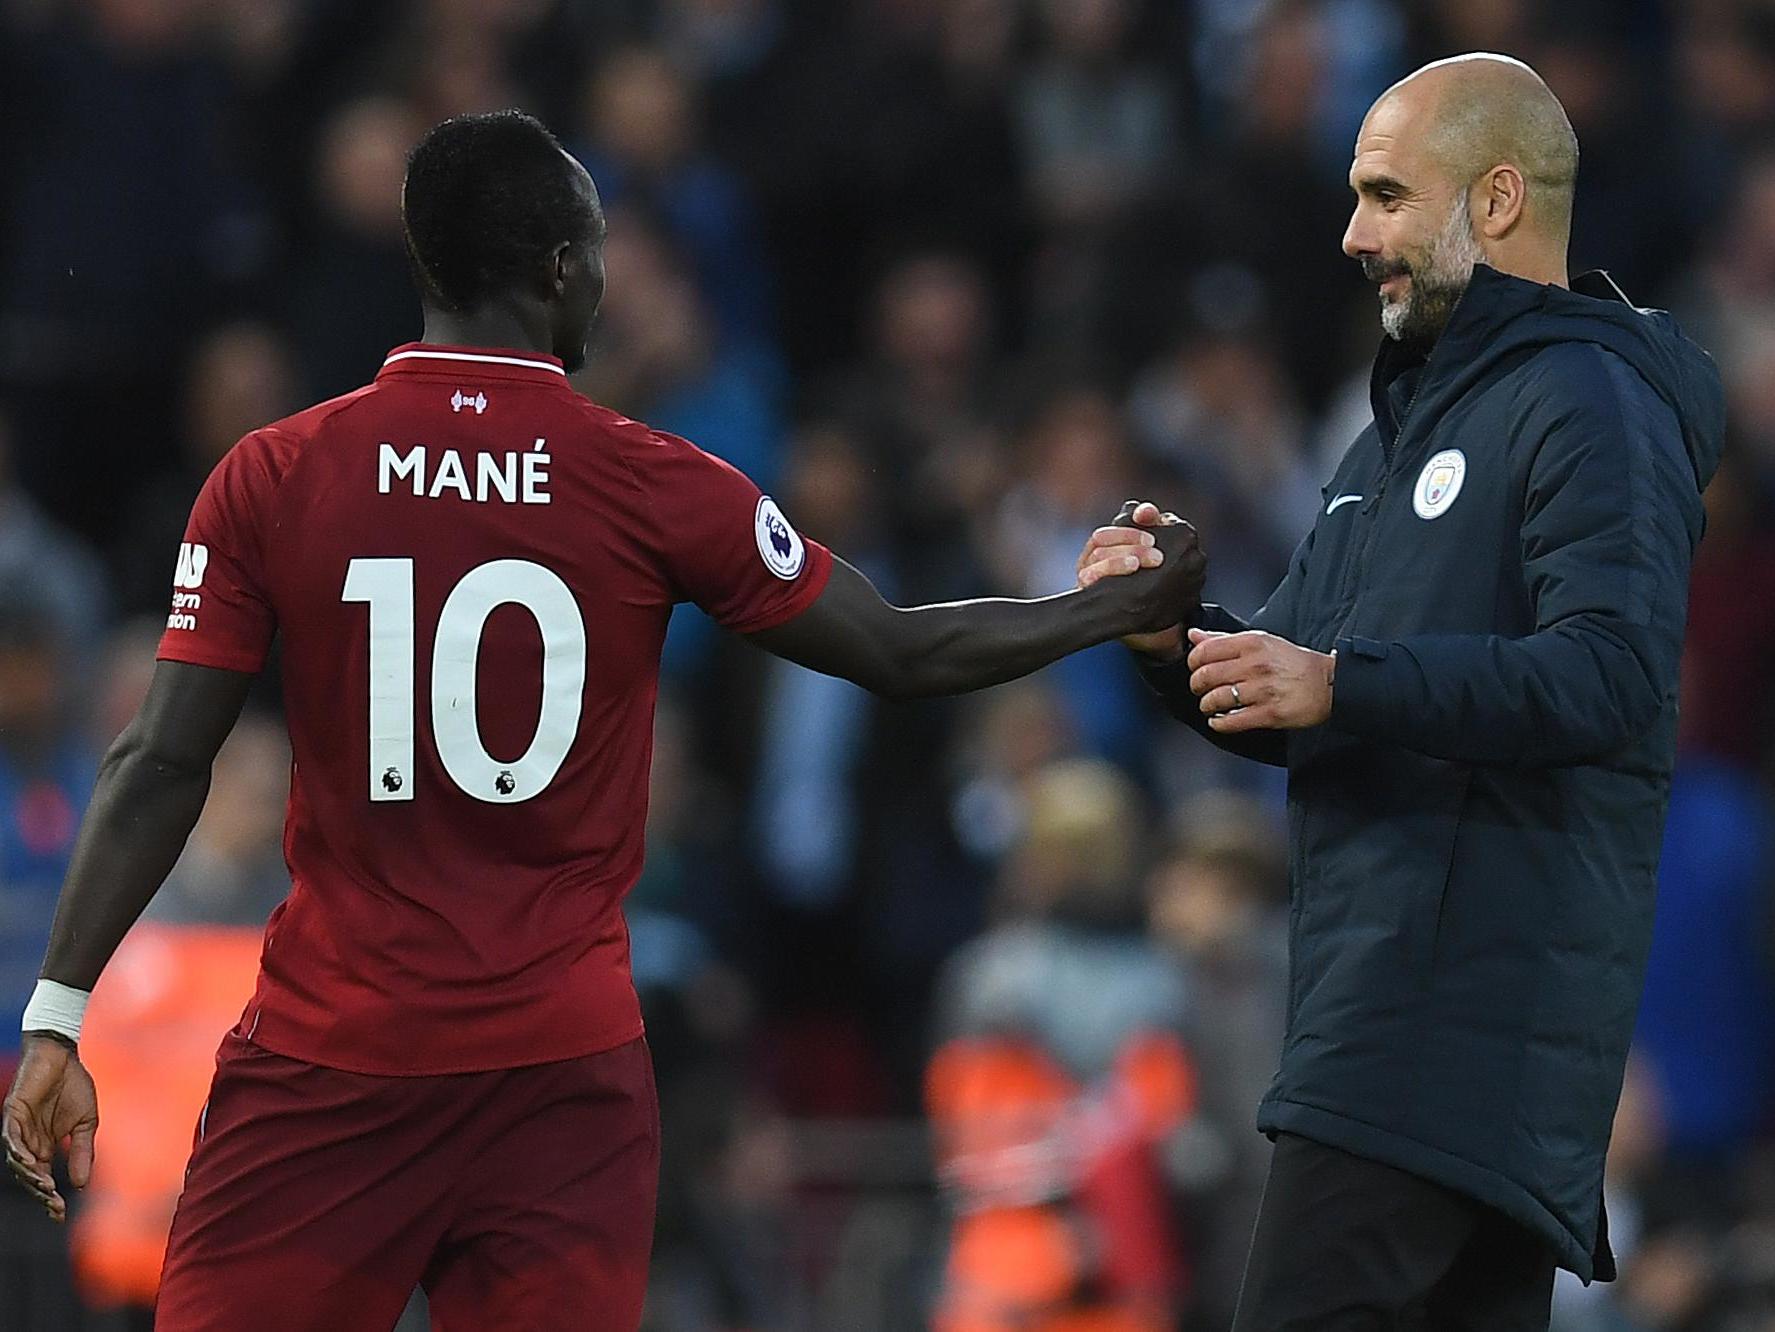 Manchester City's Pep Guardiola shakes hands with Liverpool's Sadio Mane